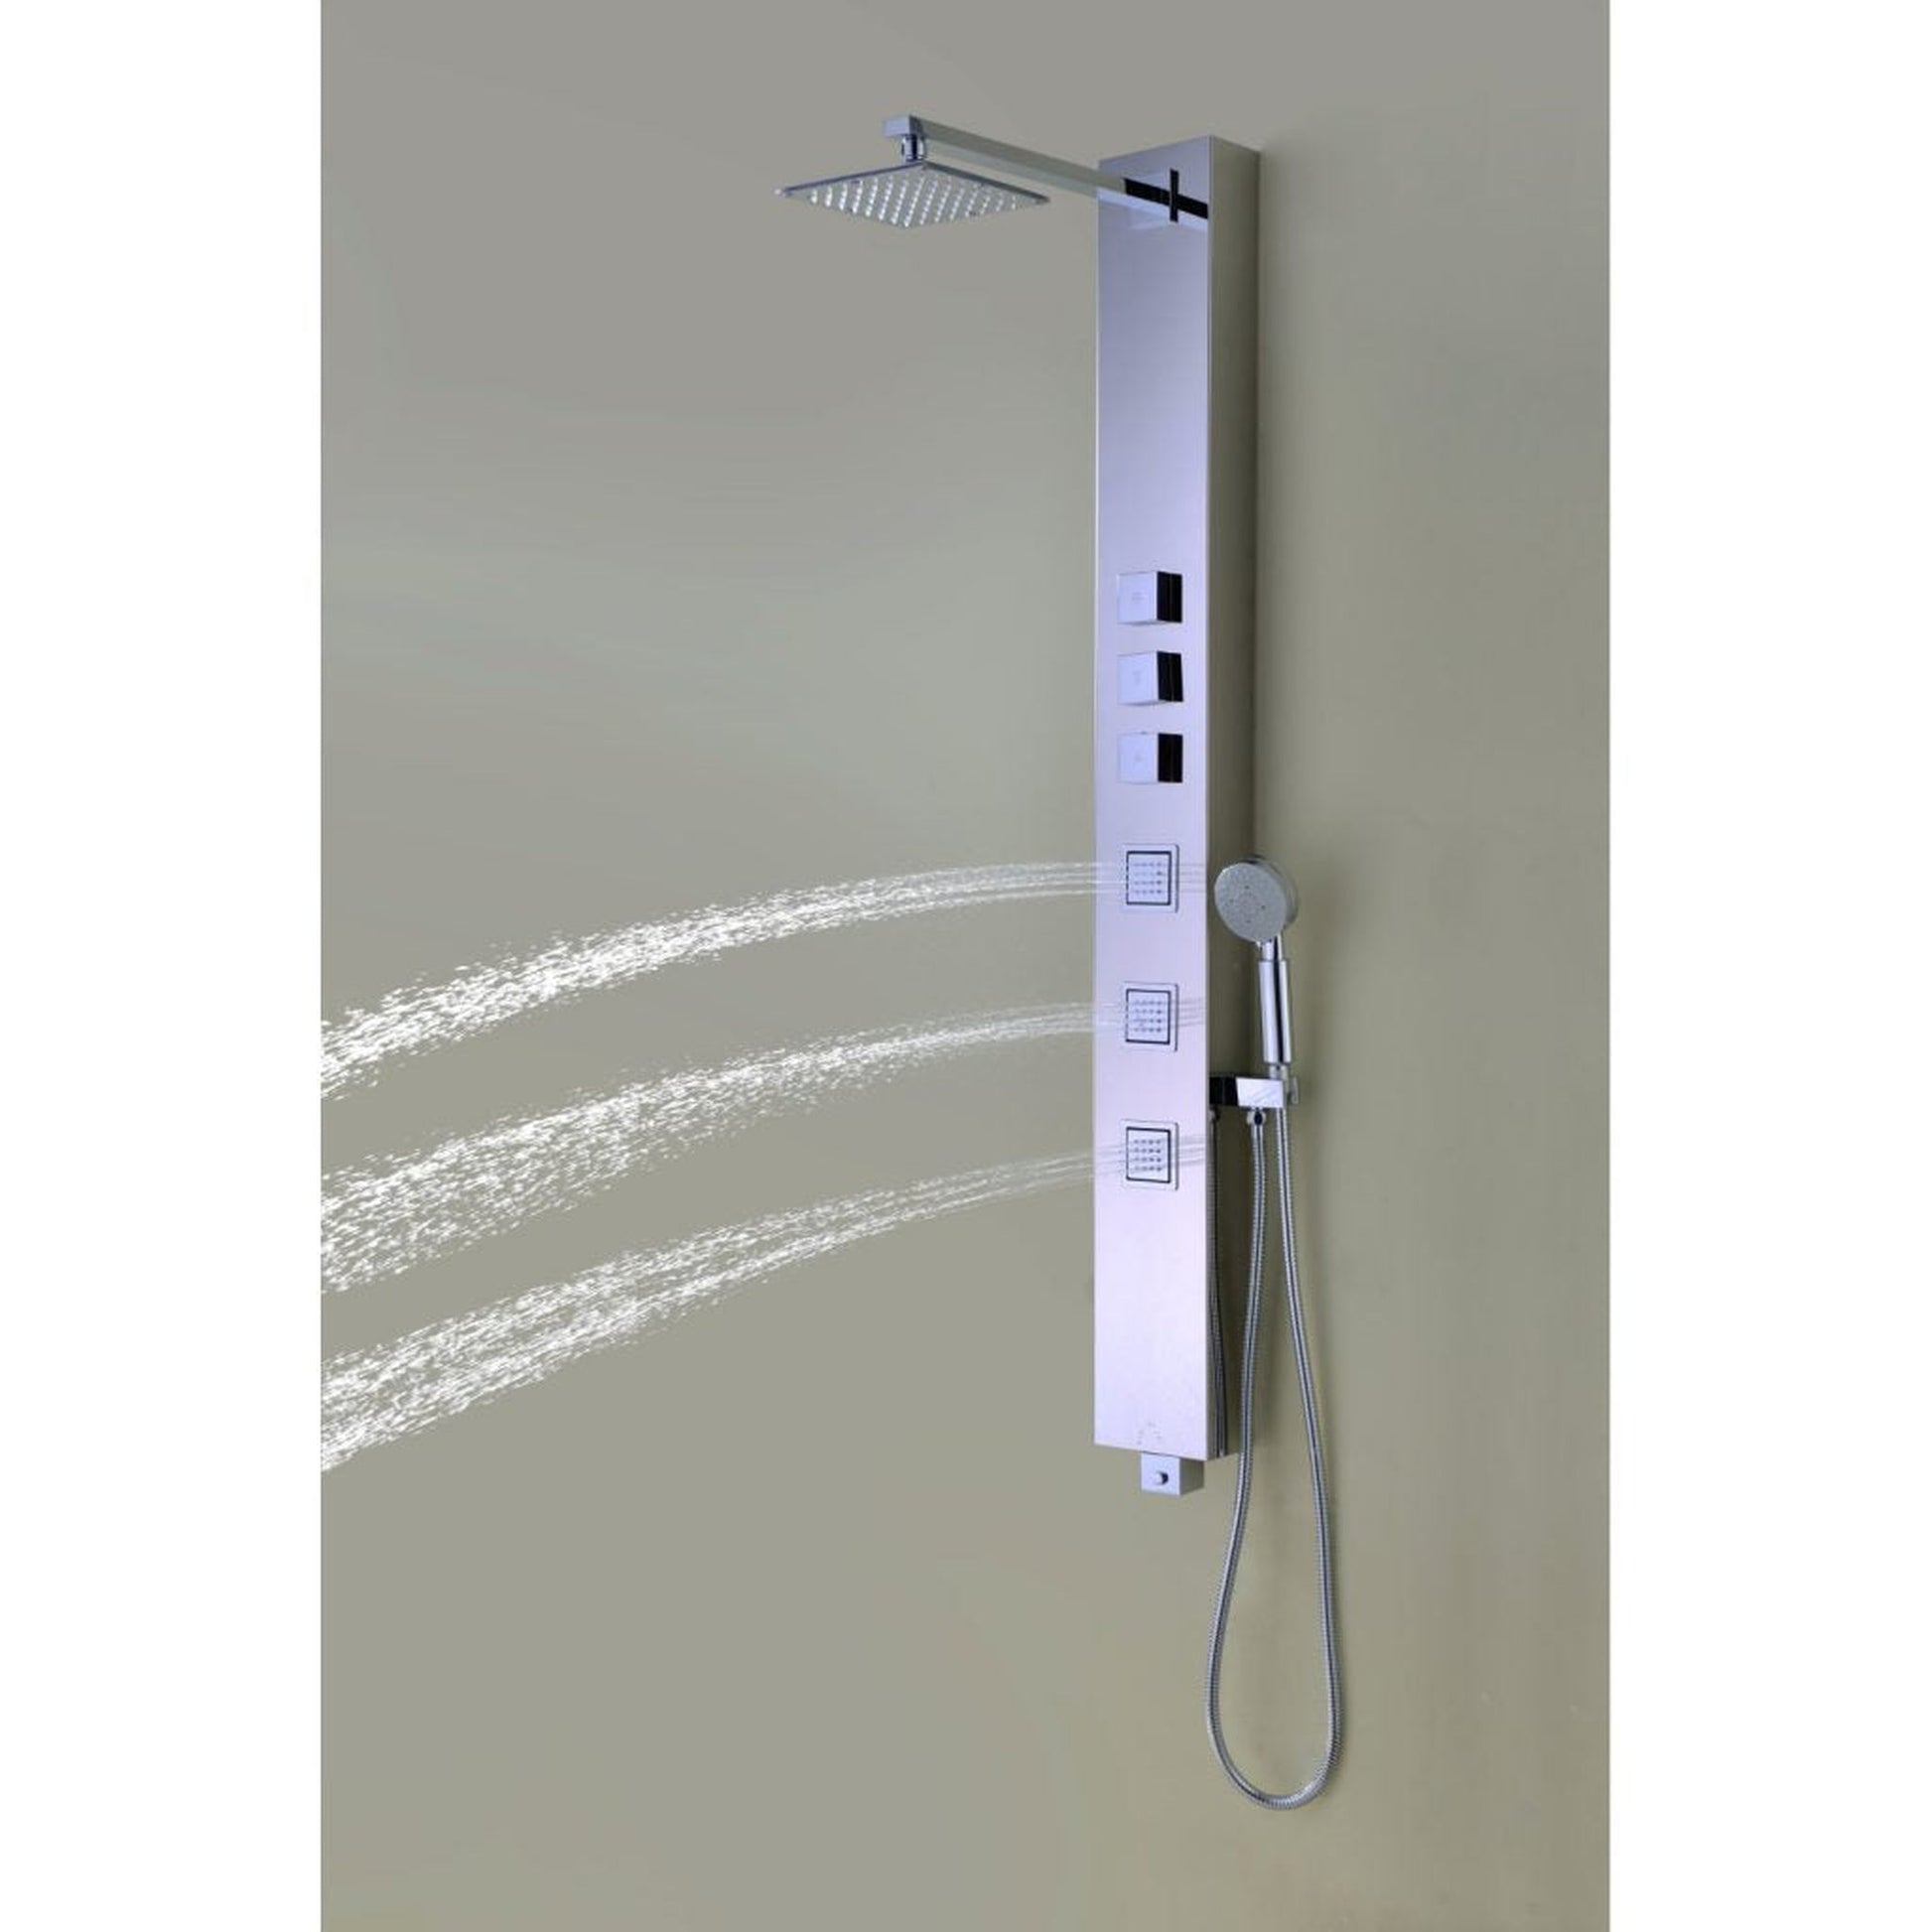 ANZZI Lann Series 53" Chrome 3-Jetted Full Body Shower Panel With Heavy Rain Shower Head and Euro-Grip Hand Sprayer